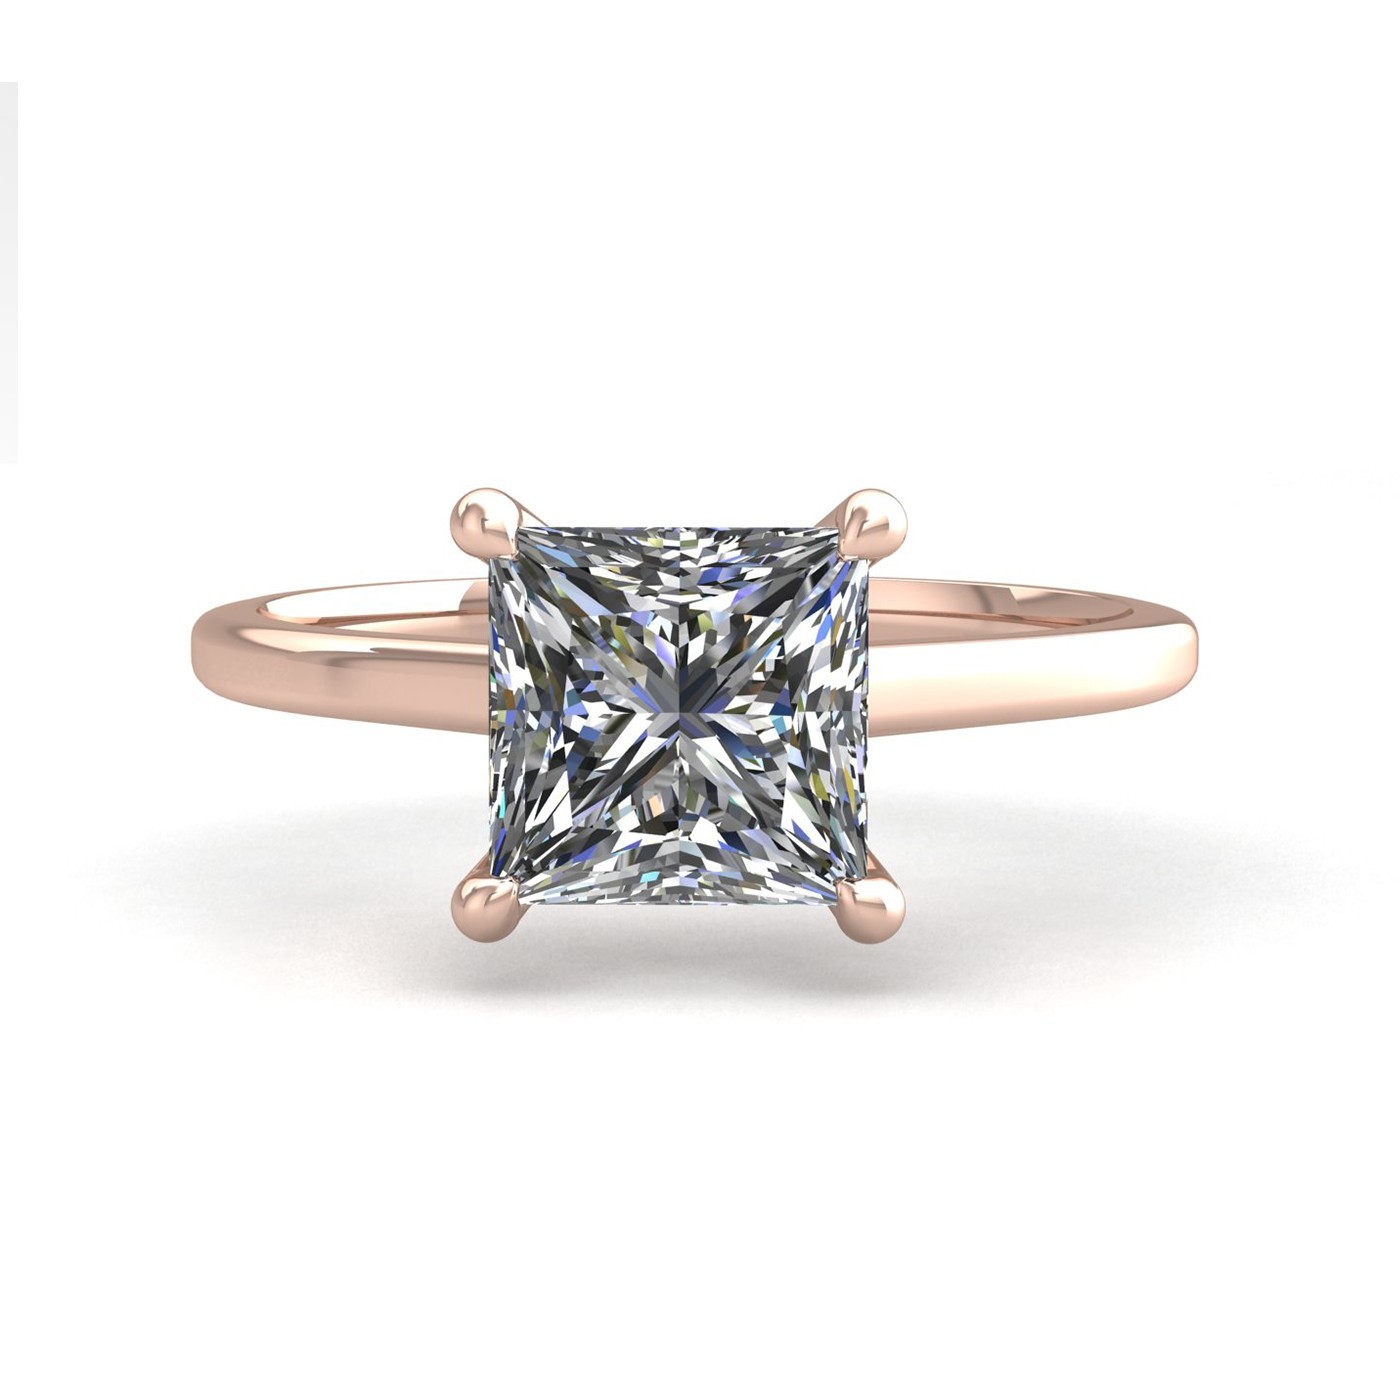 18k rose gold  0,30 ct 4 prongs solitaire princess cut diamond engagement ring with whisper thin band Photos & images